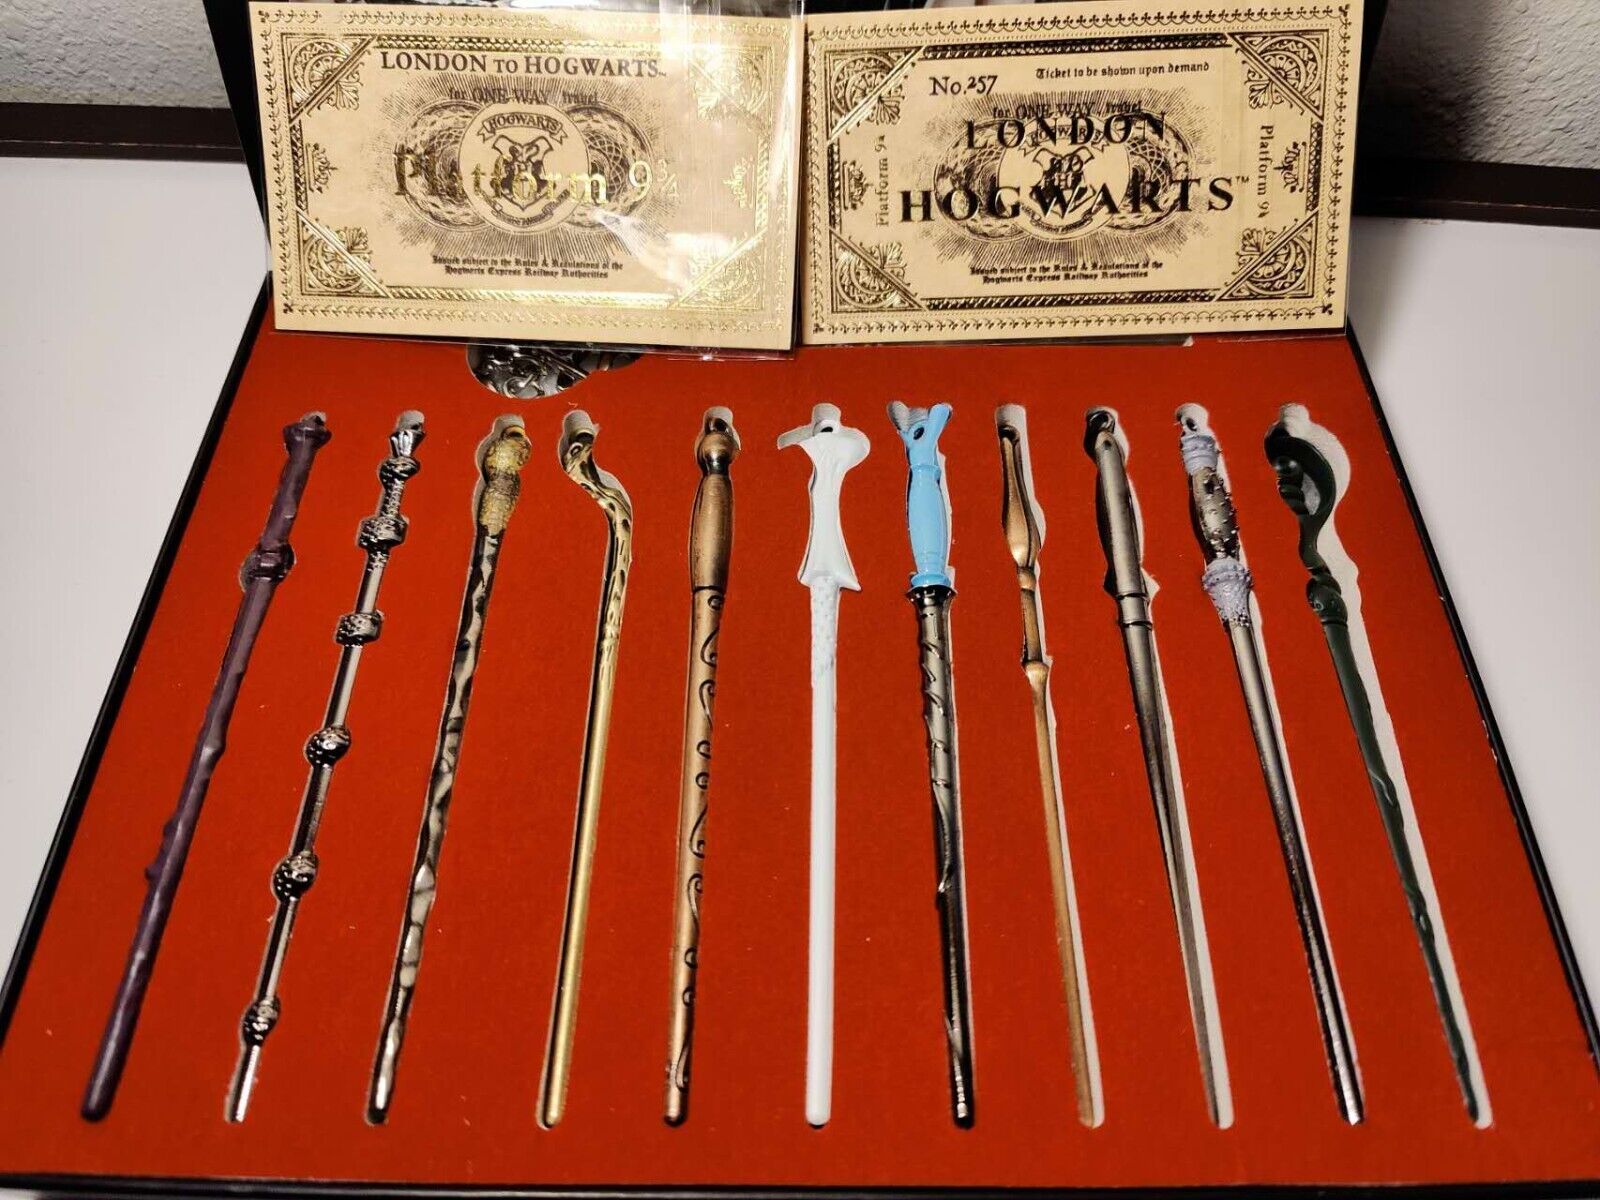 2ND Gen Harry Potter11 Magic Wands And 2 Tickets Cards Great Gift Box Set